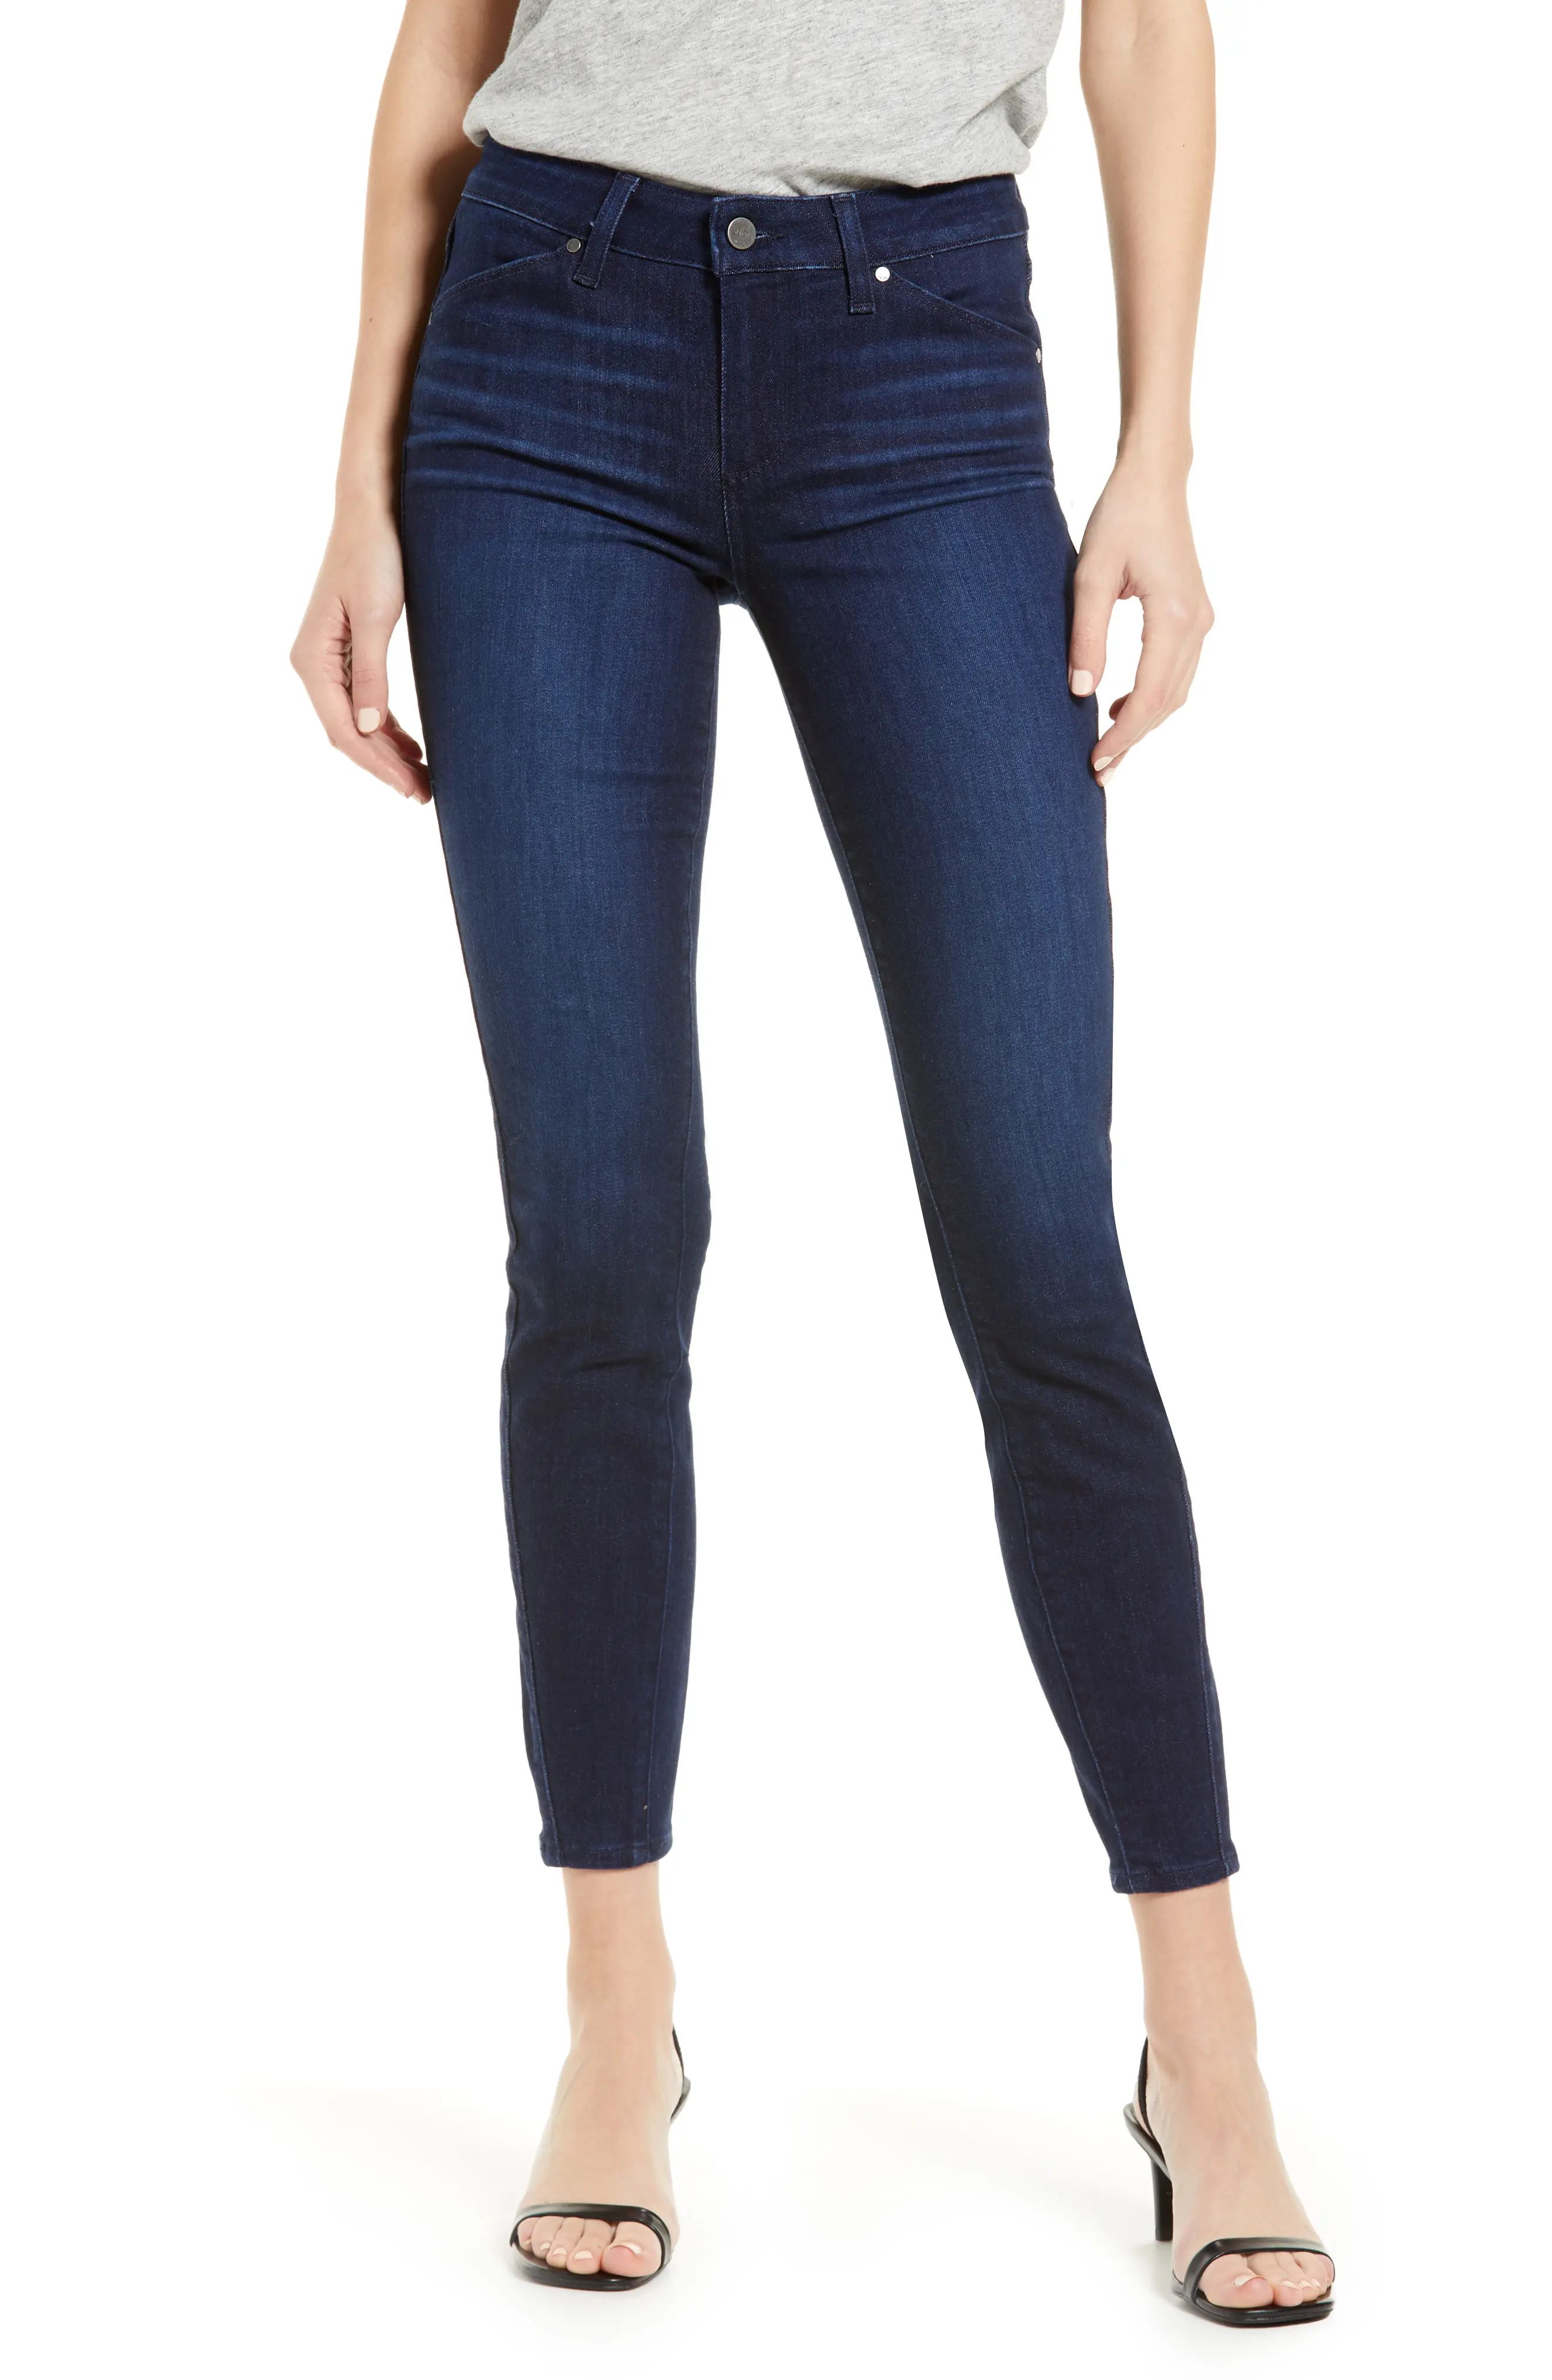 PAIGE Verdugo Angle Pocket Ankle Skinny Jeans in Micaela at Nordstrom, Size 25 | Nordstrom